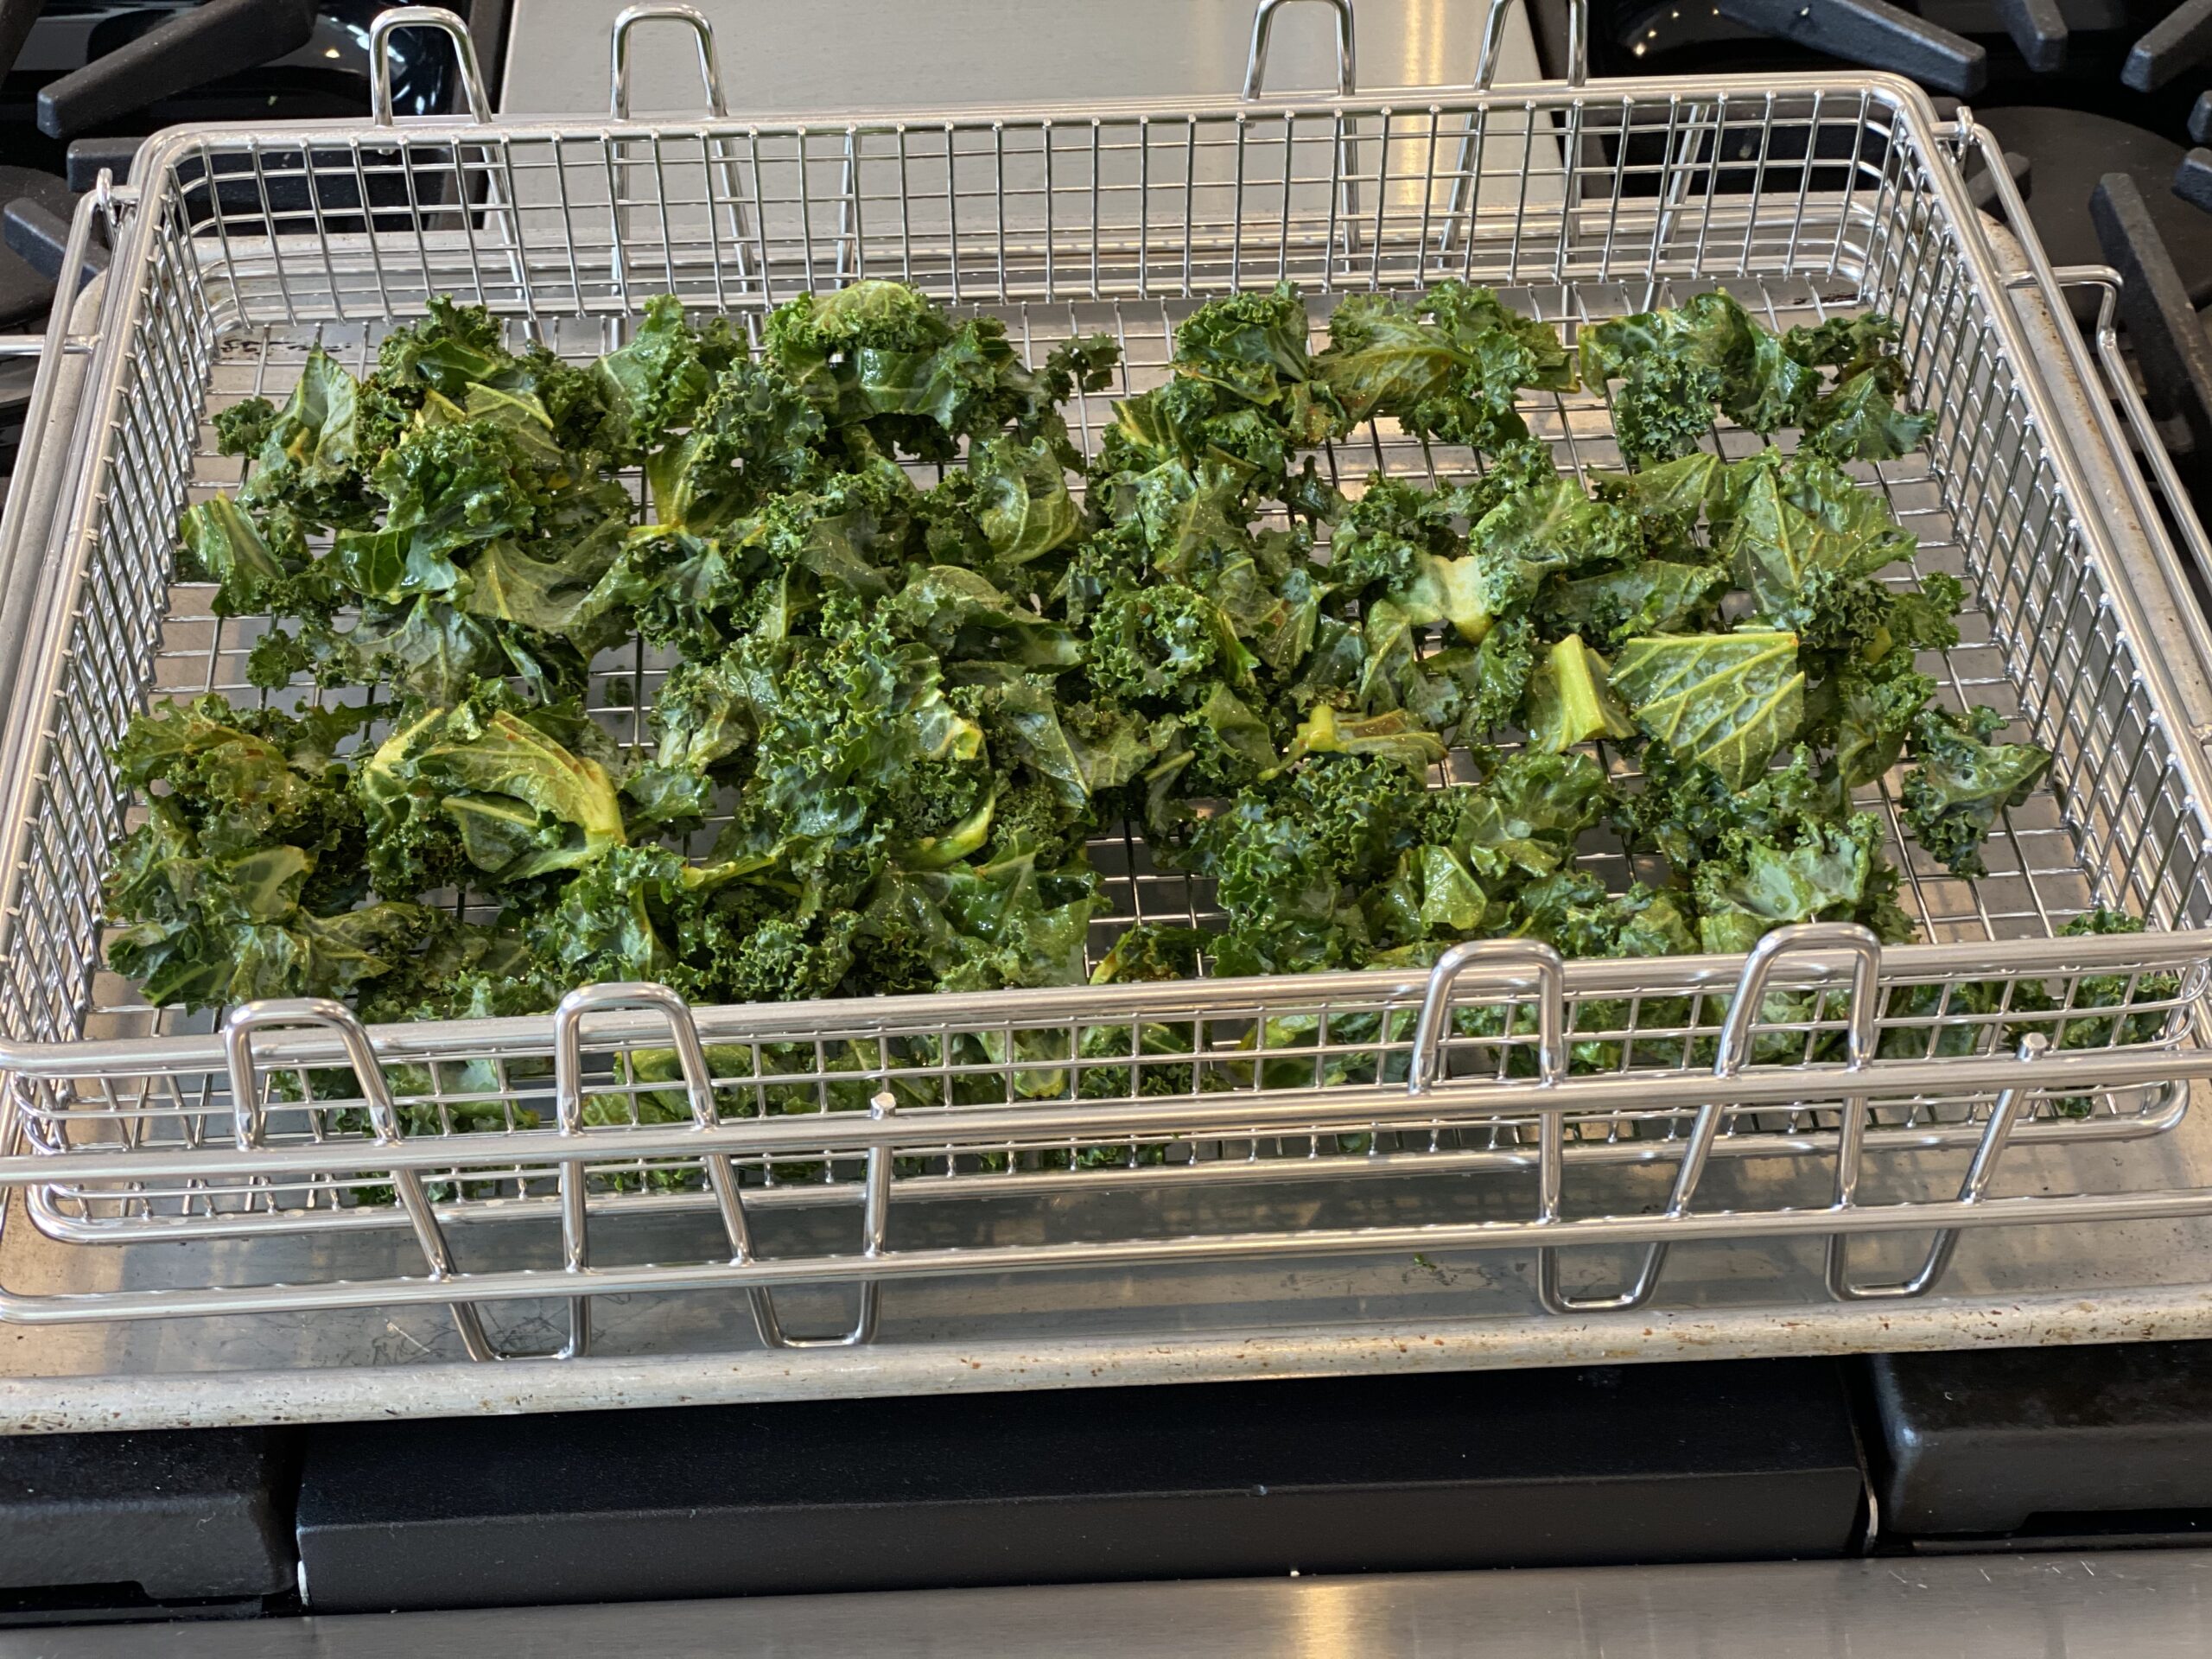 Kale chips in Basquettes